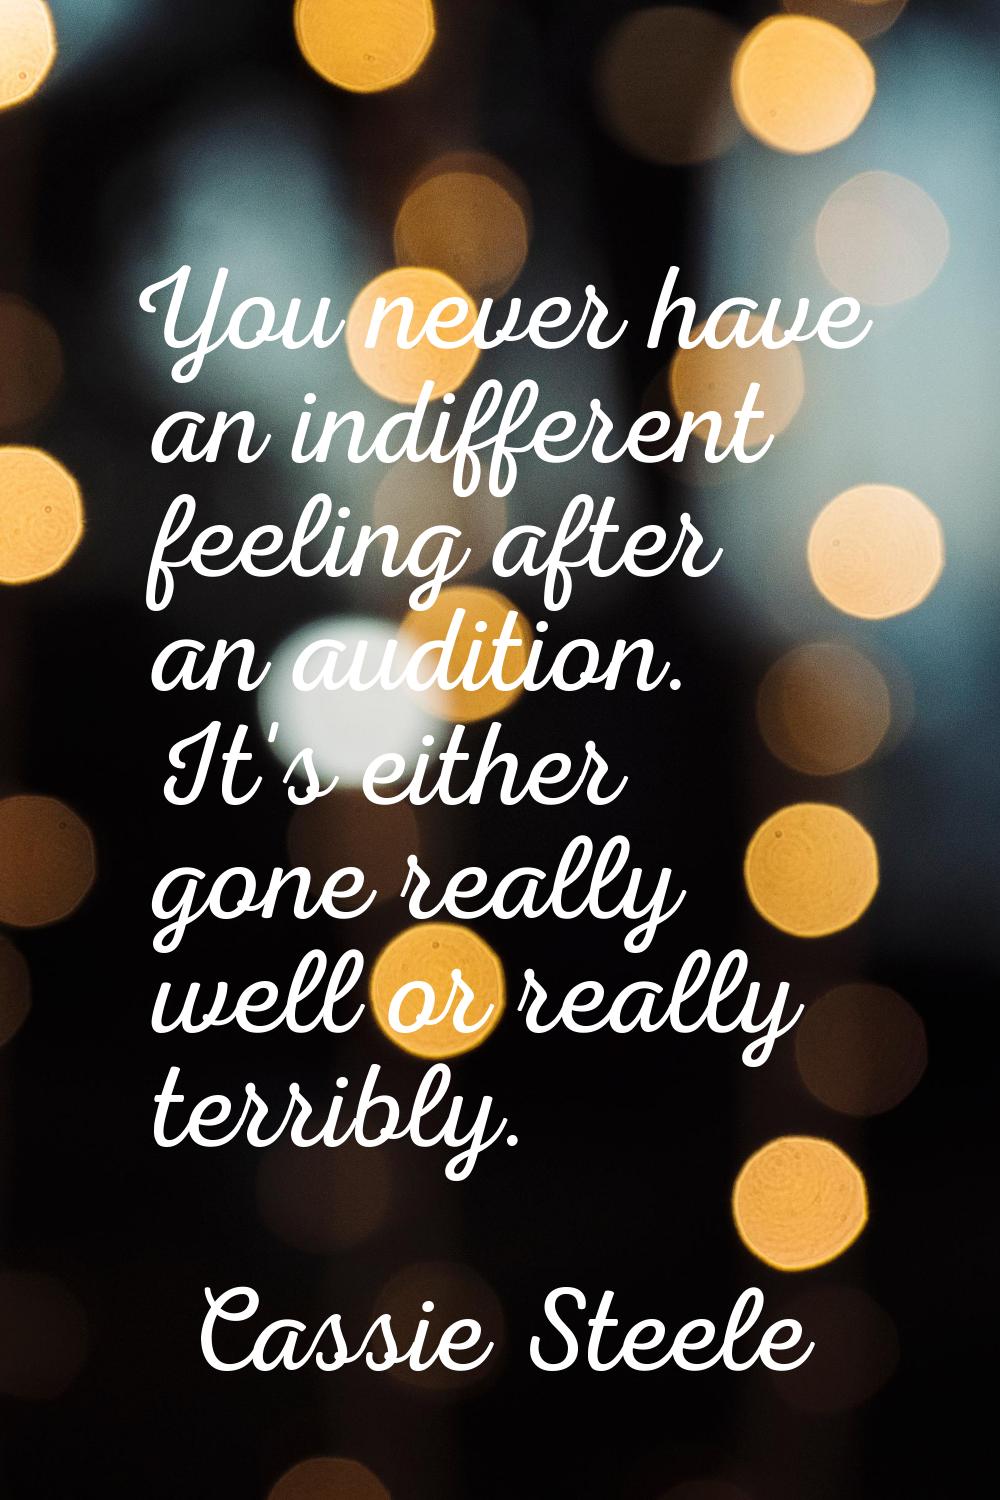 You never have an indifferent feeling after an audition. It's either gone really well or really ter